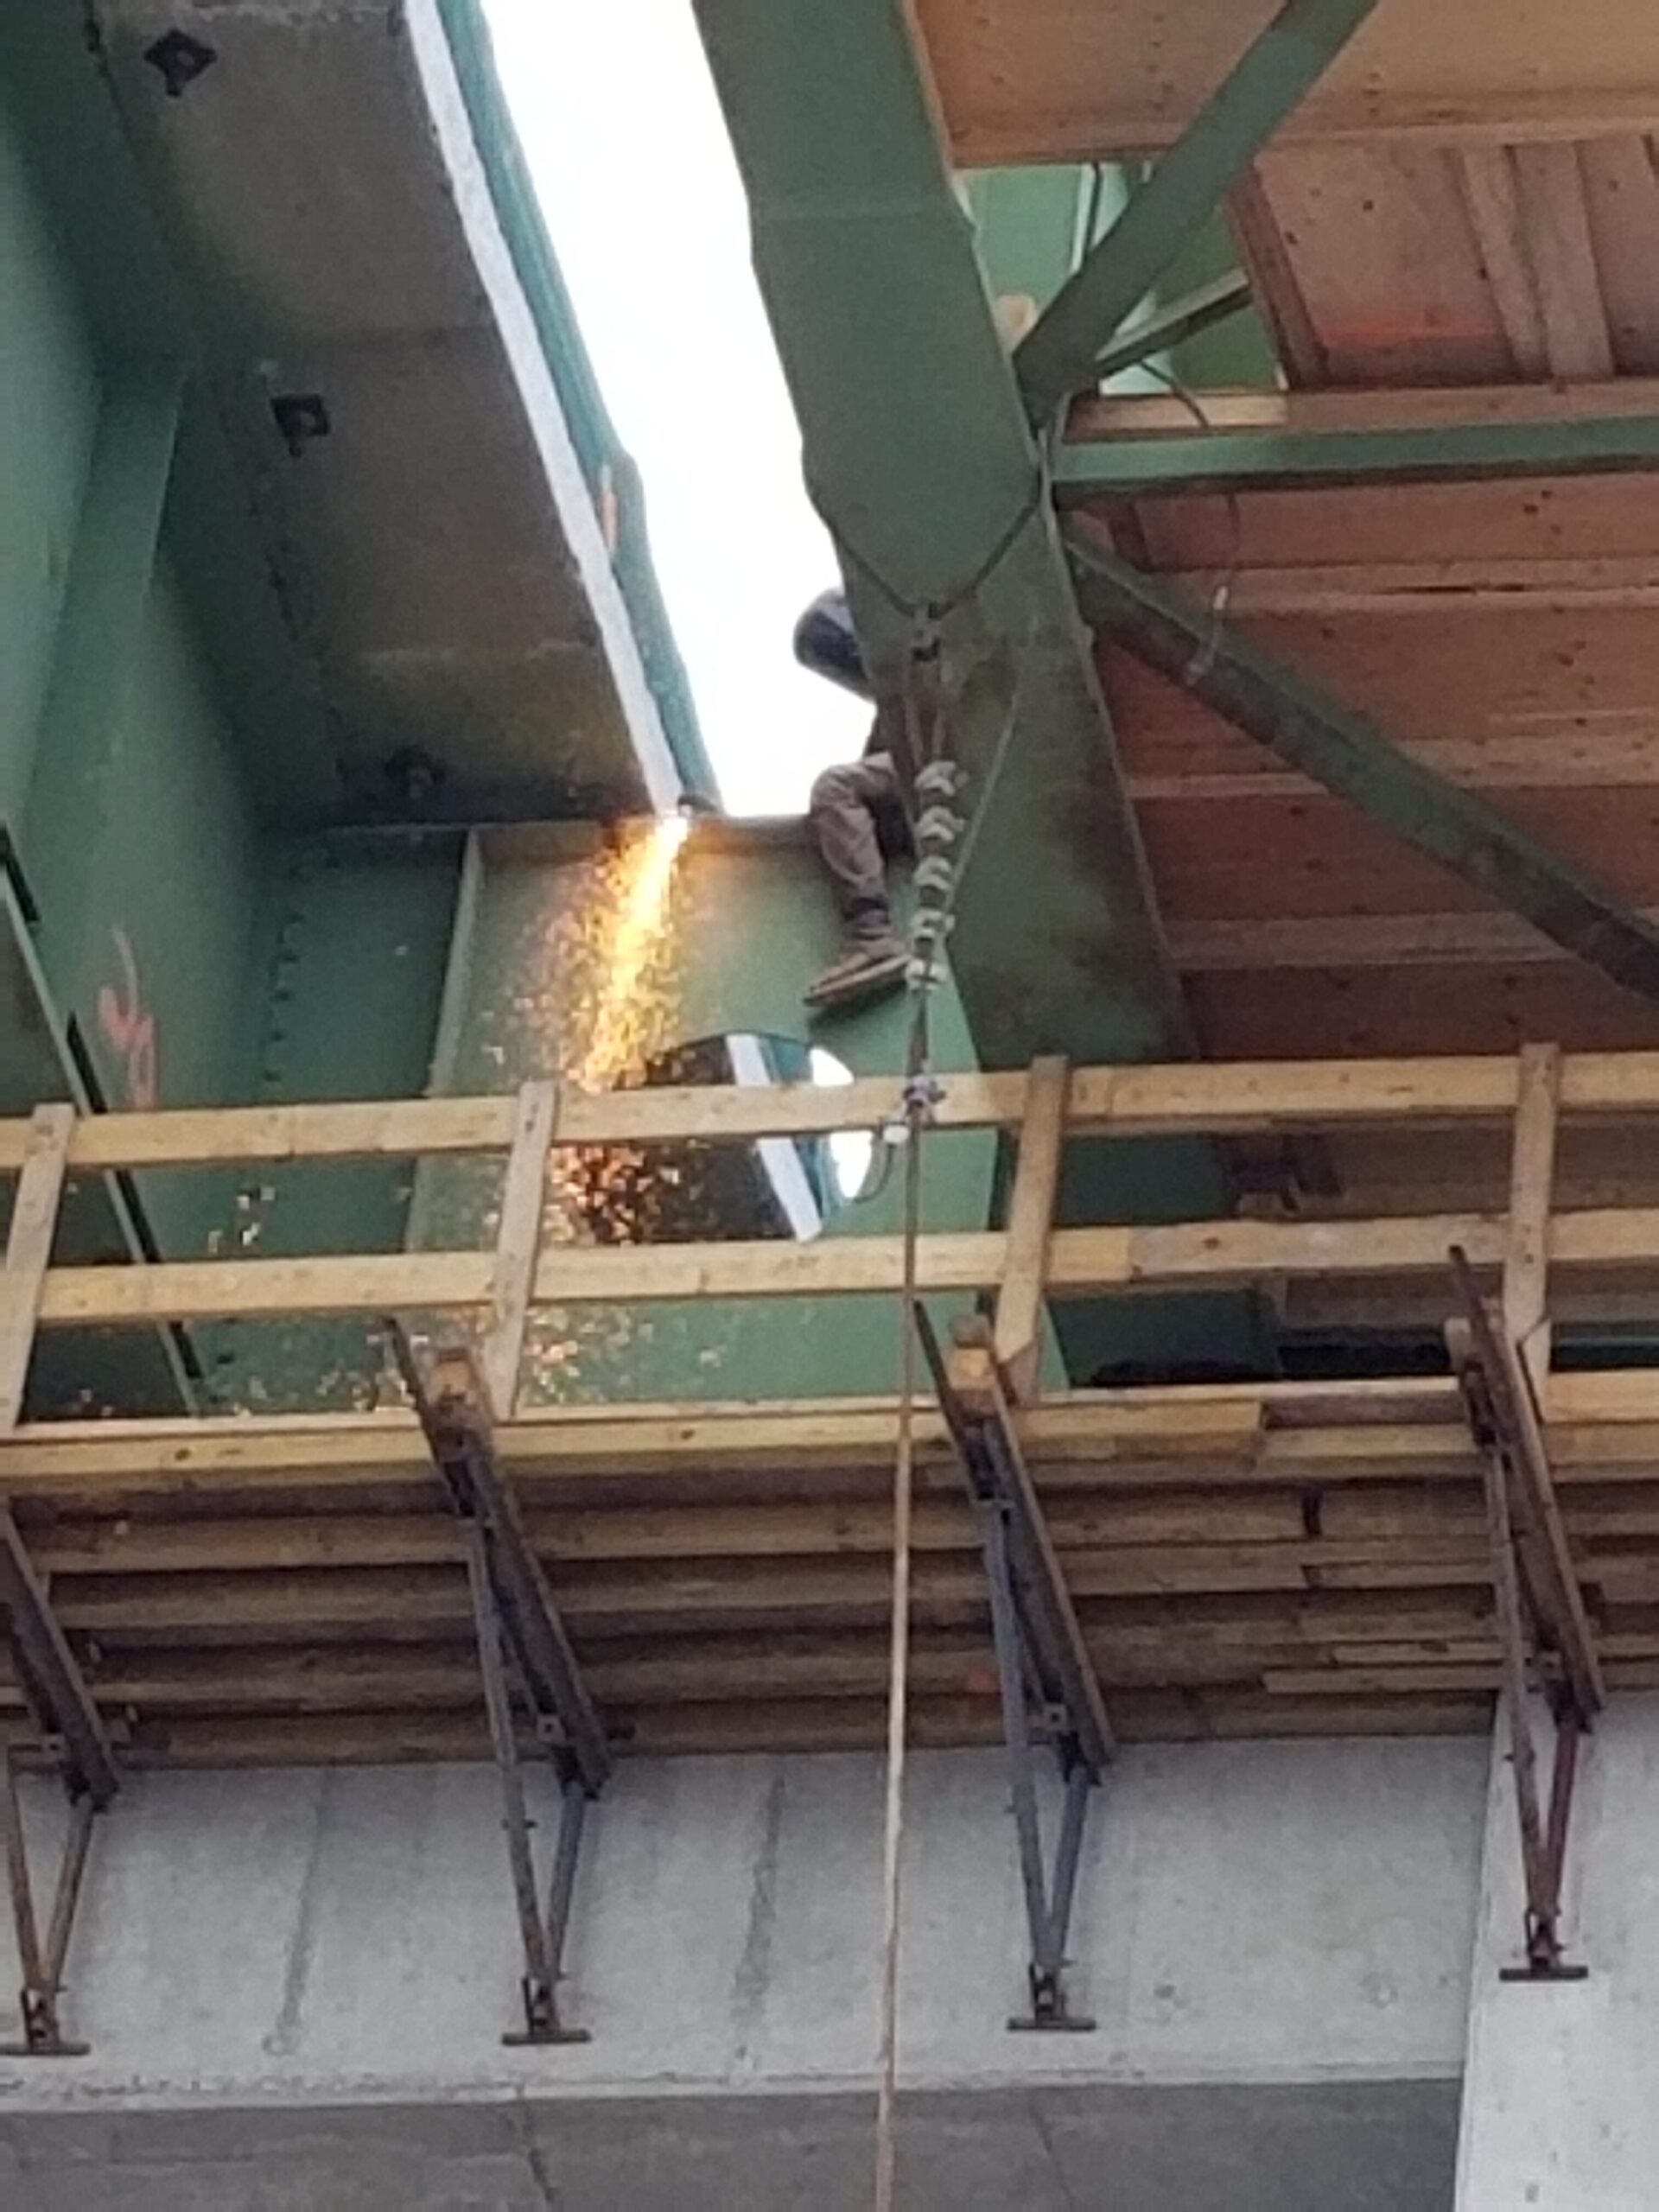 Cutting the diaphragm for the final girder removal